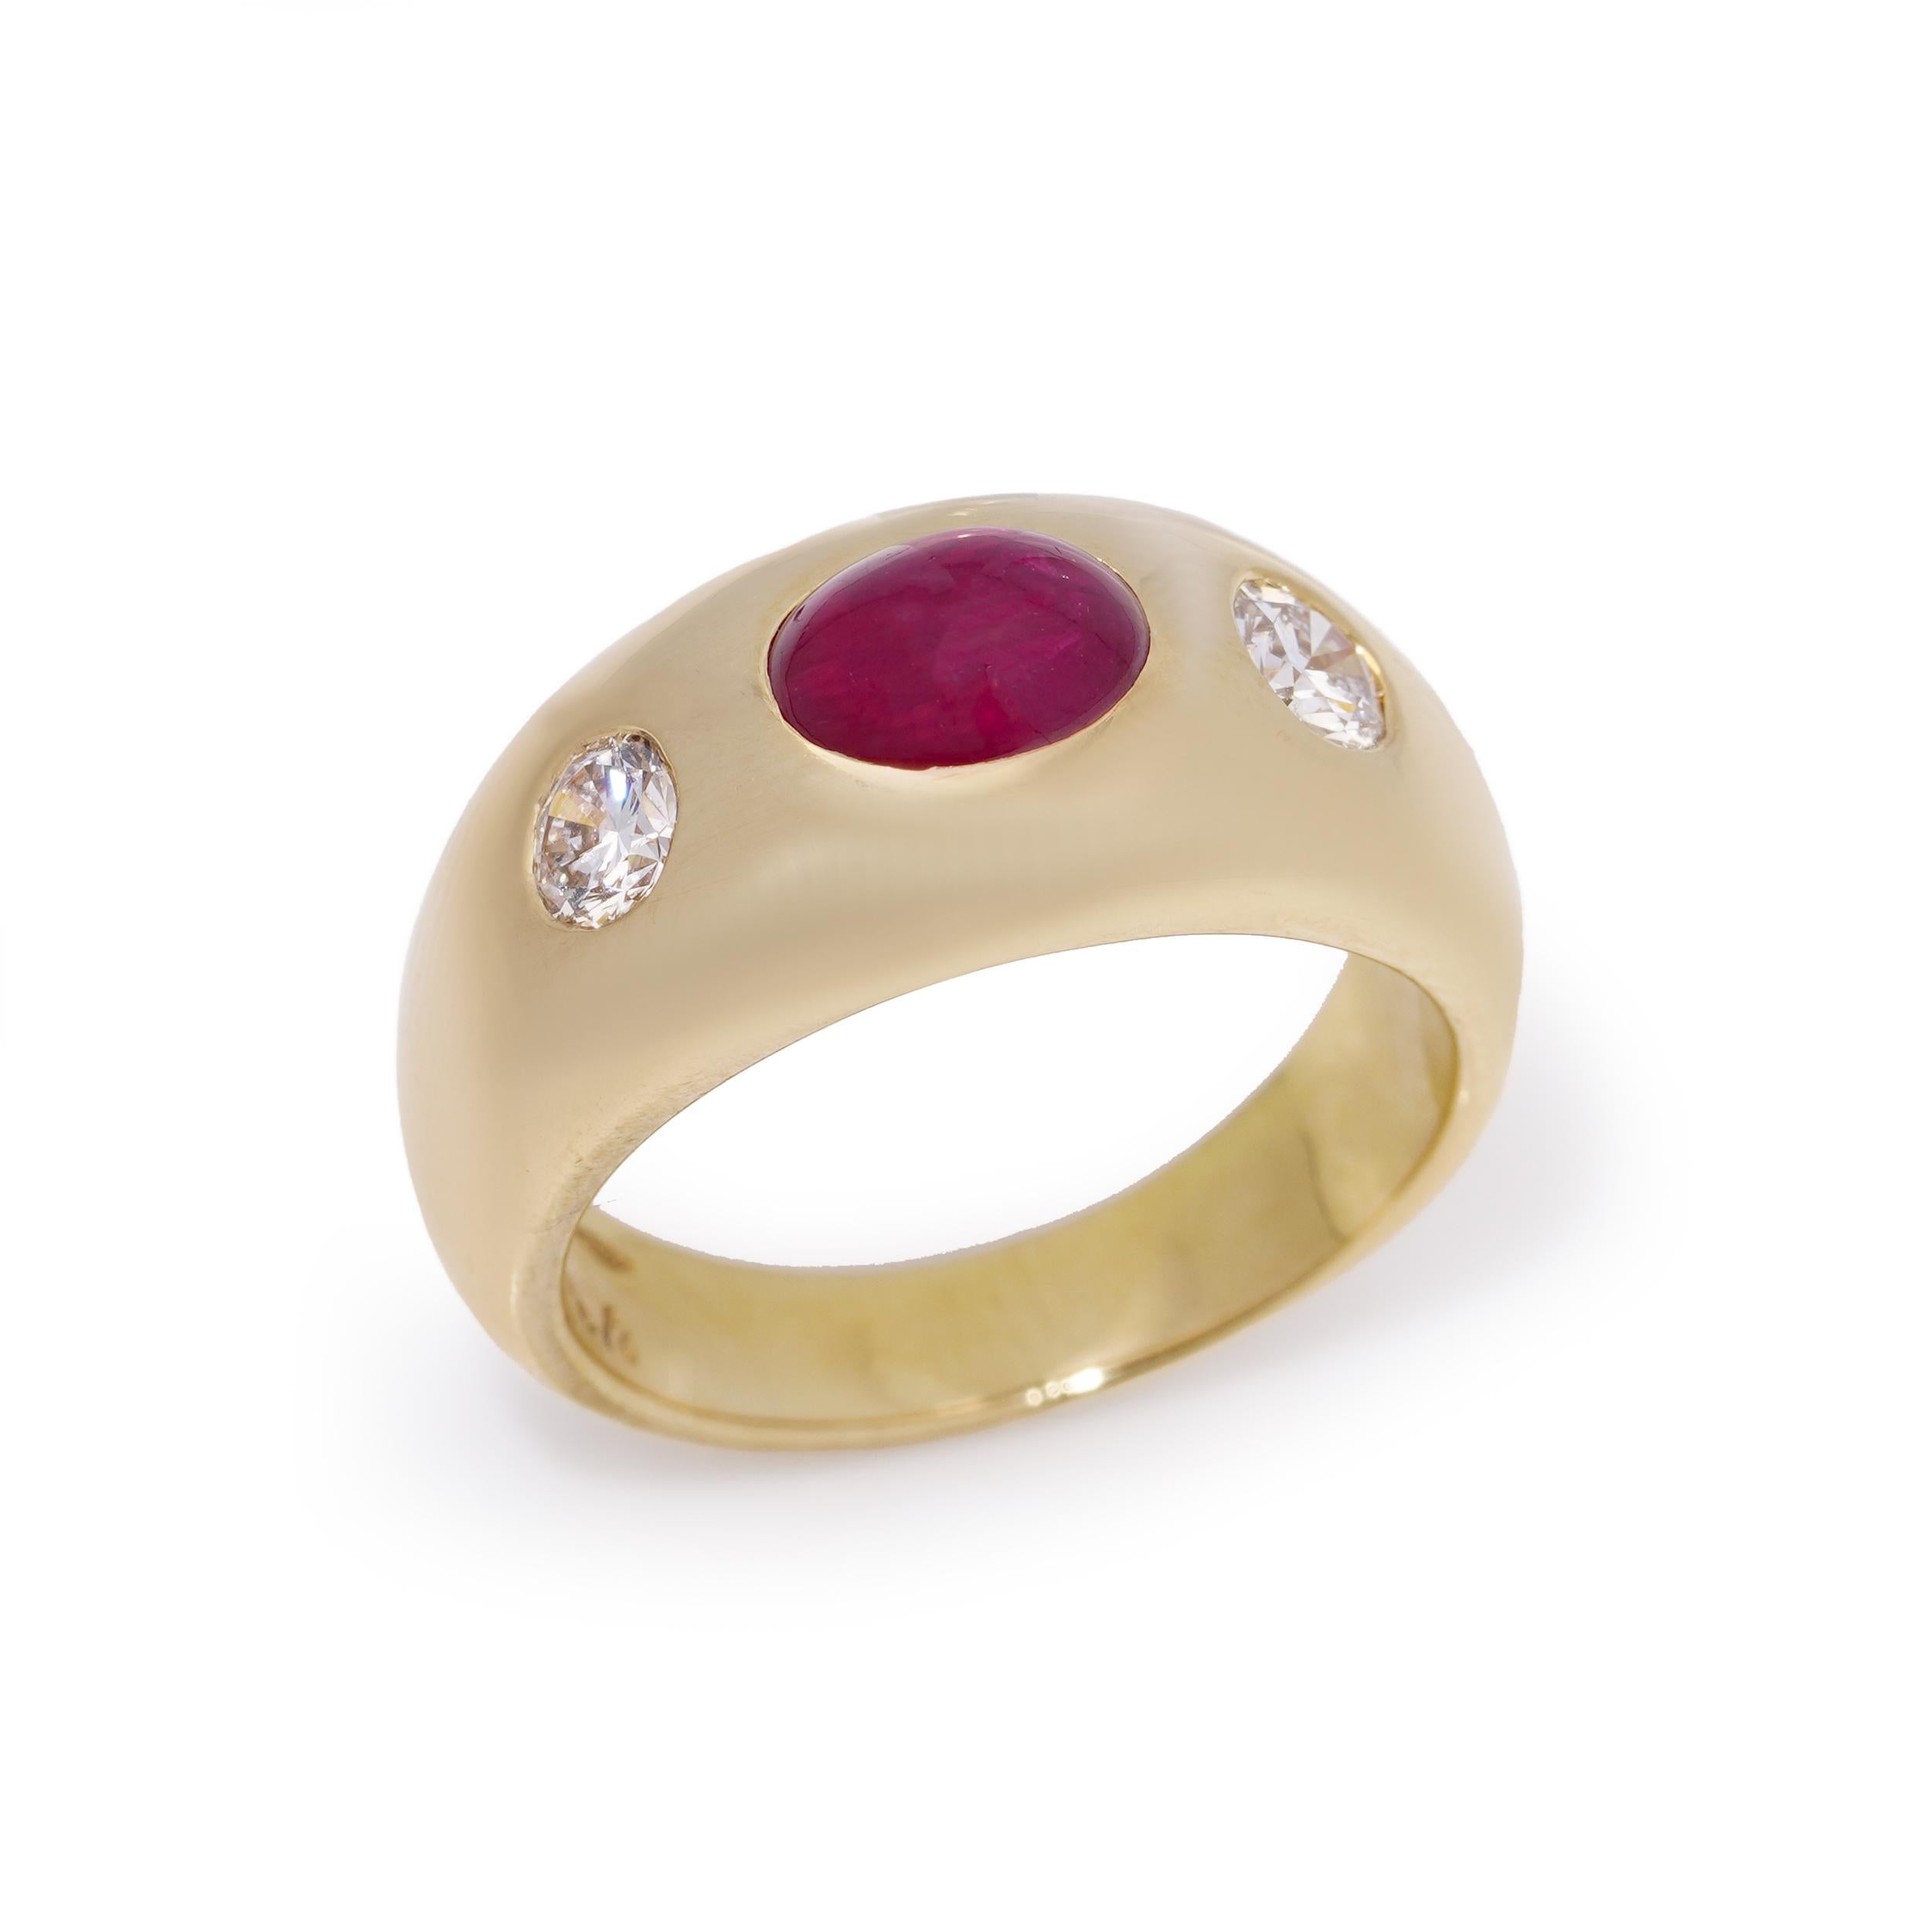 Bvlgari 18kt. gold three - stone Burma Cabochon ruby and diamond ring For Sale 3